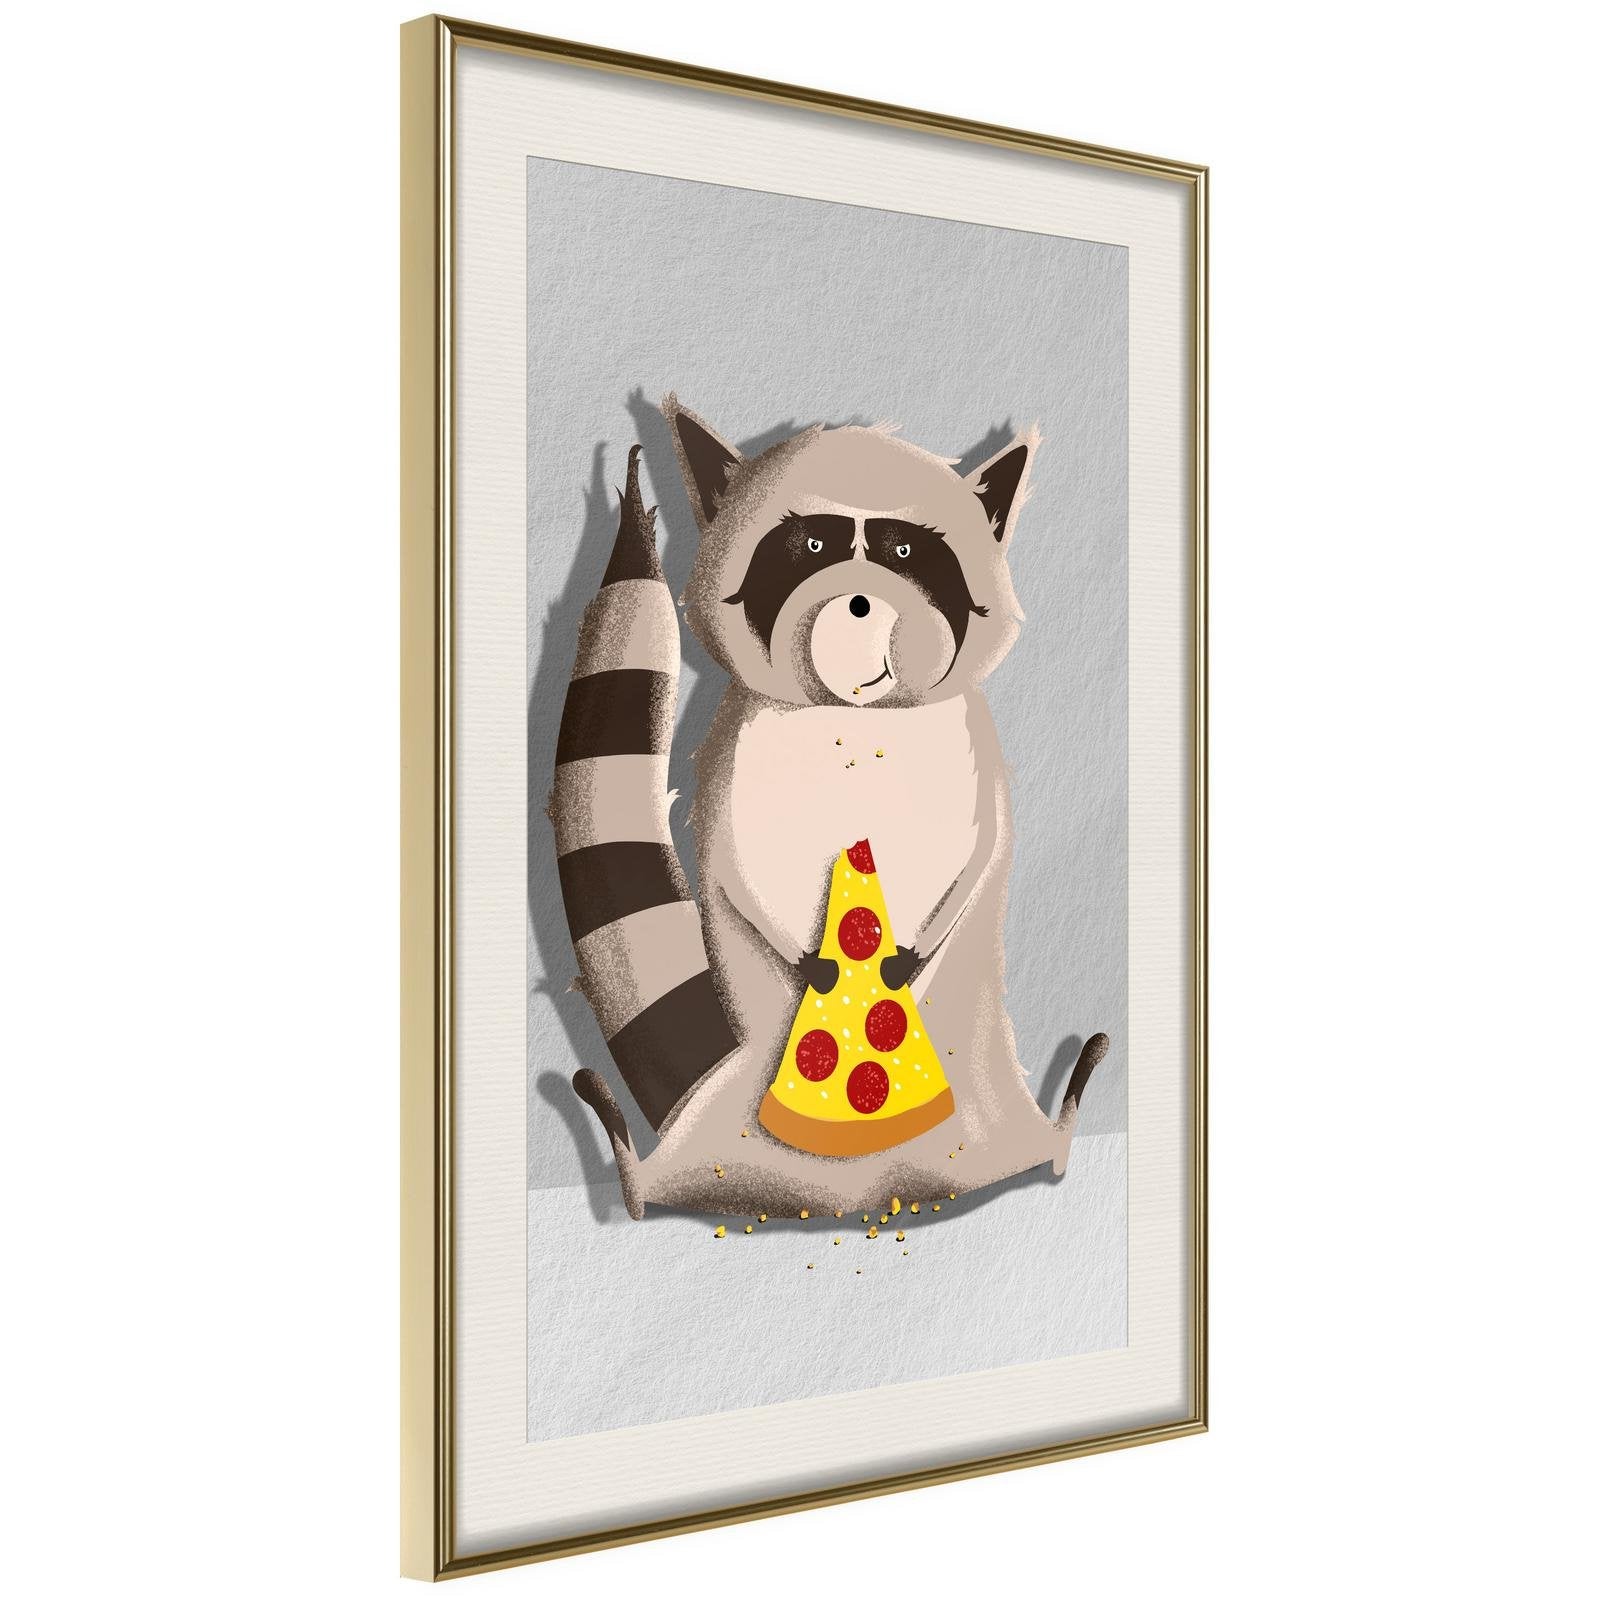 Inramad Poster / Tavla - Racoon Eating Pizza-Poster Inramad-Artgeist-20x30-Guldram med passepartout-peaceofhome.se